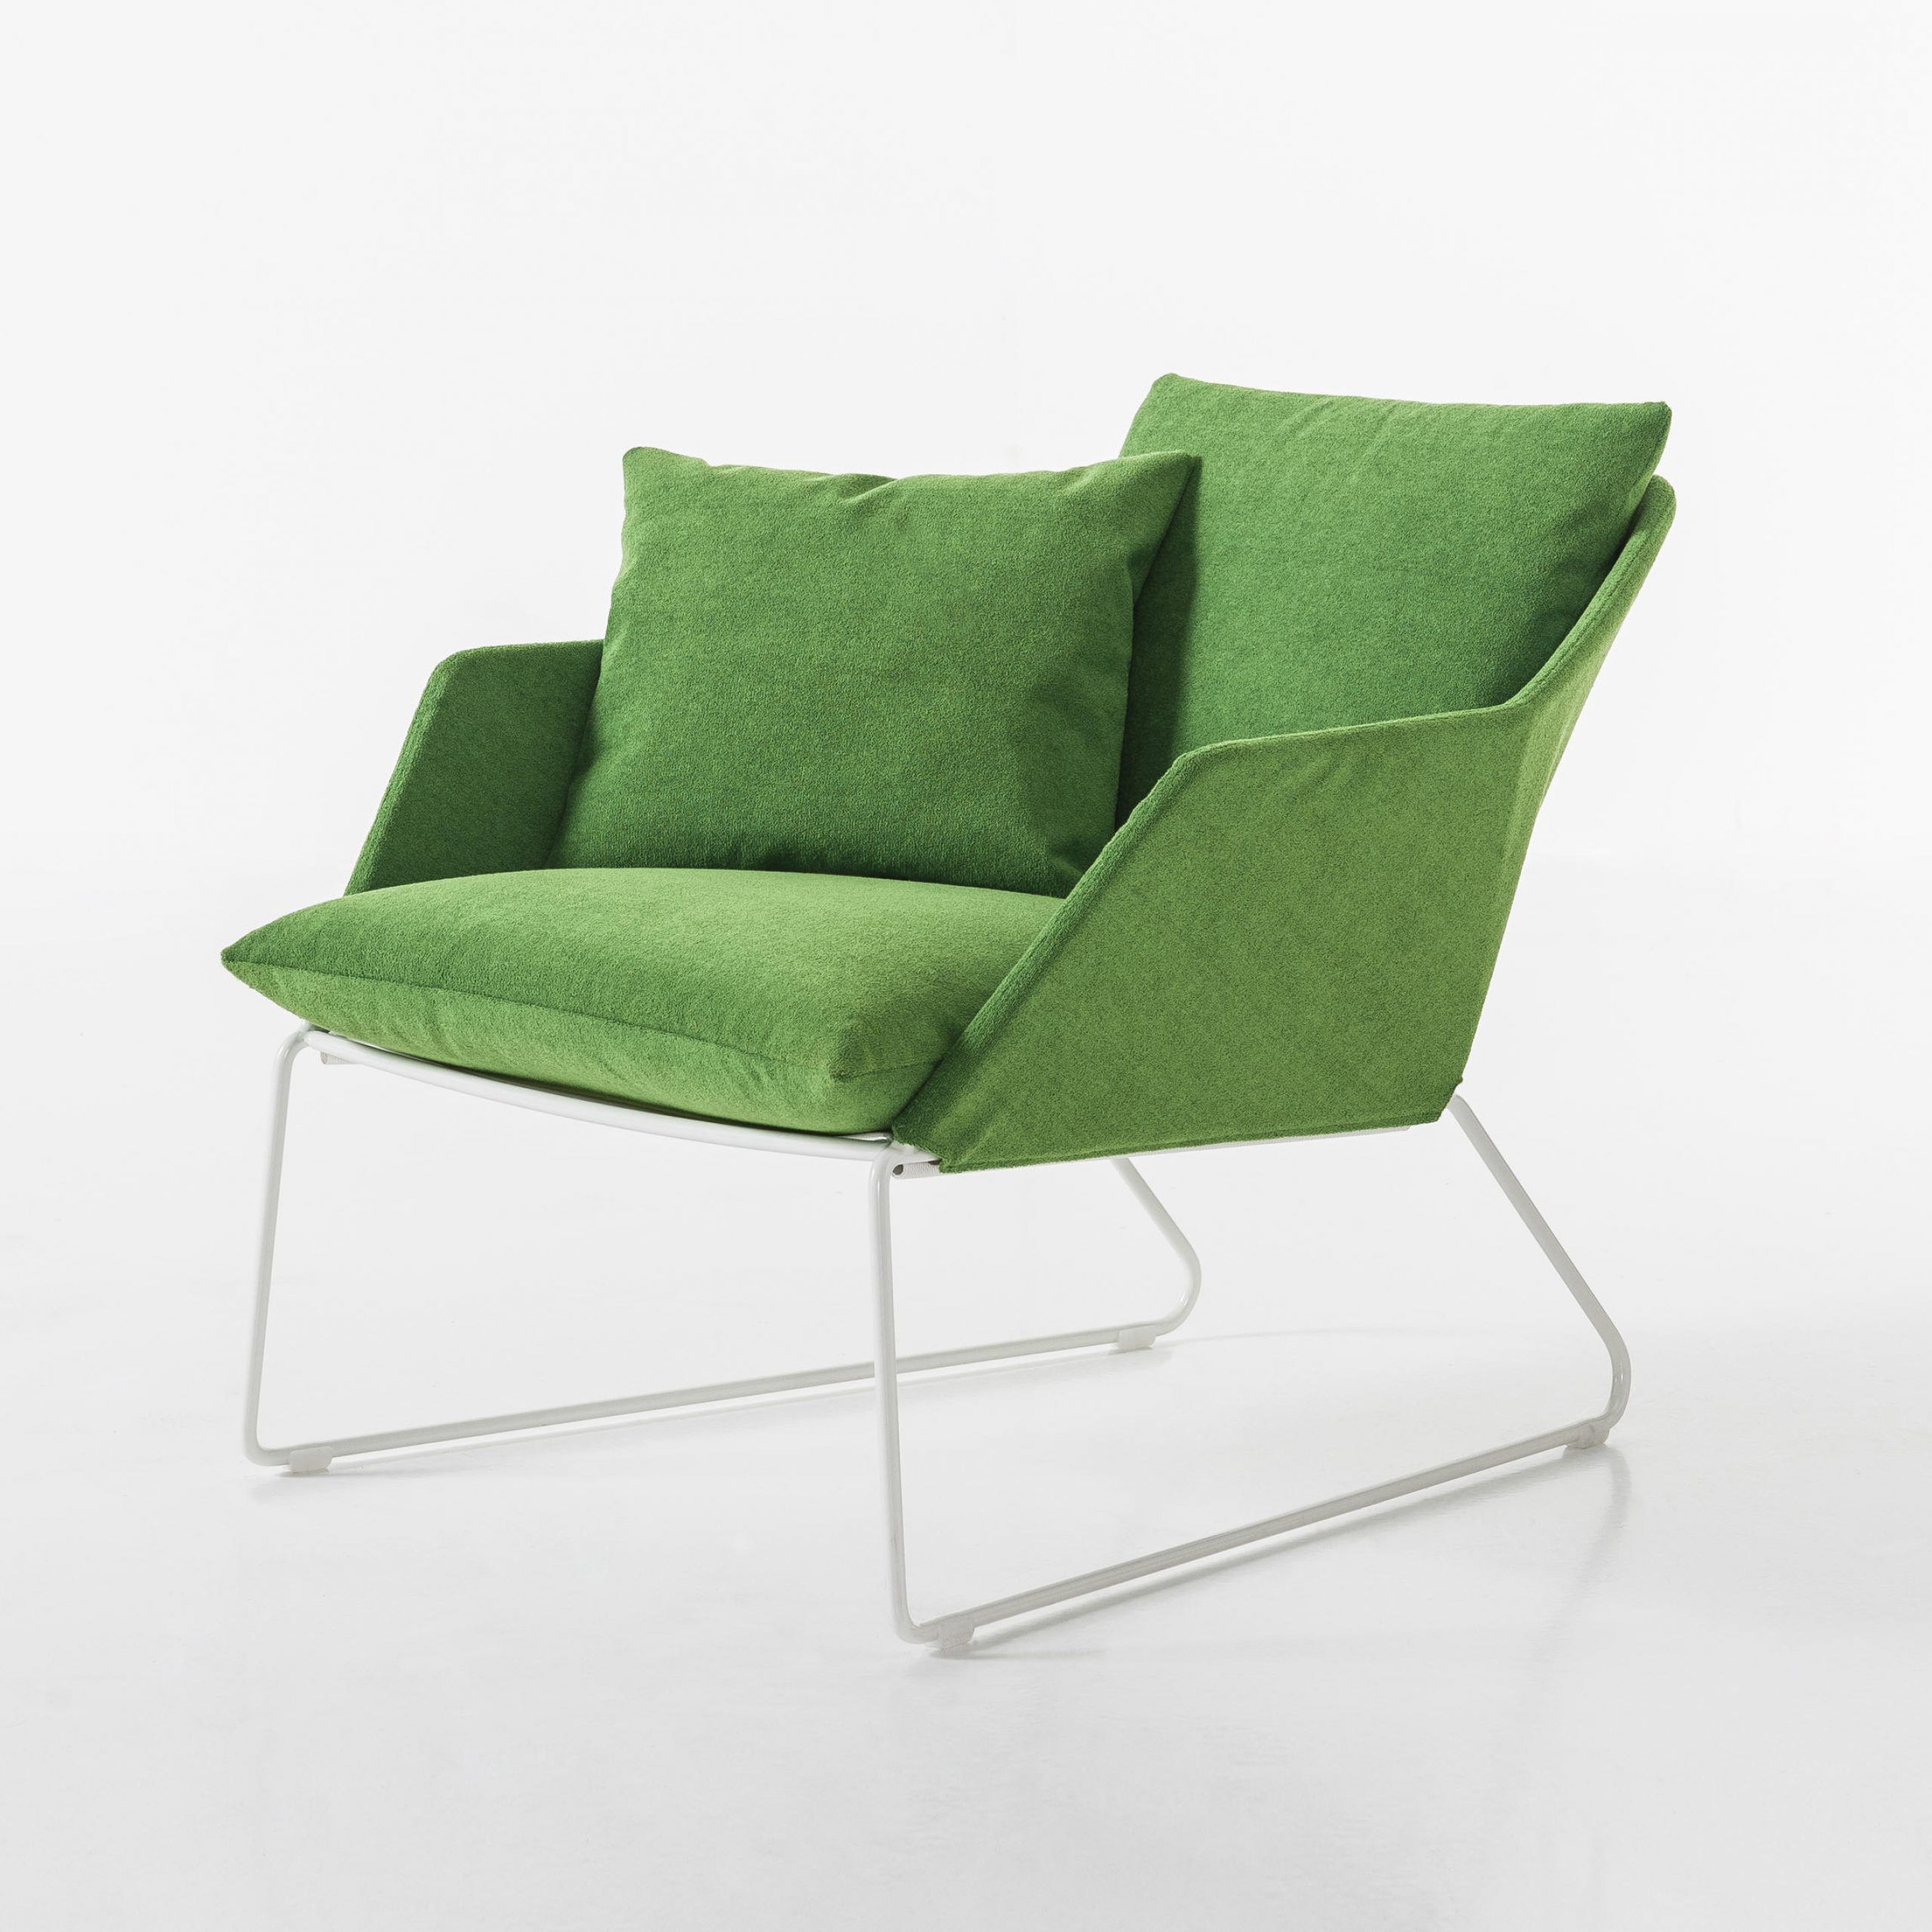 New York Outdoor | Armchair | Architonic Throughout Outdoor Armchairs (View 3 of 15)